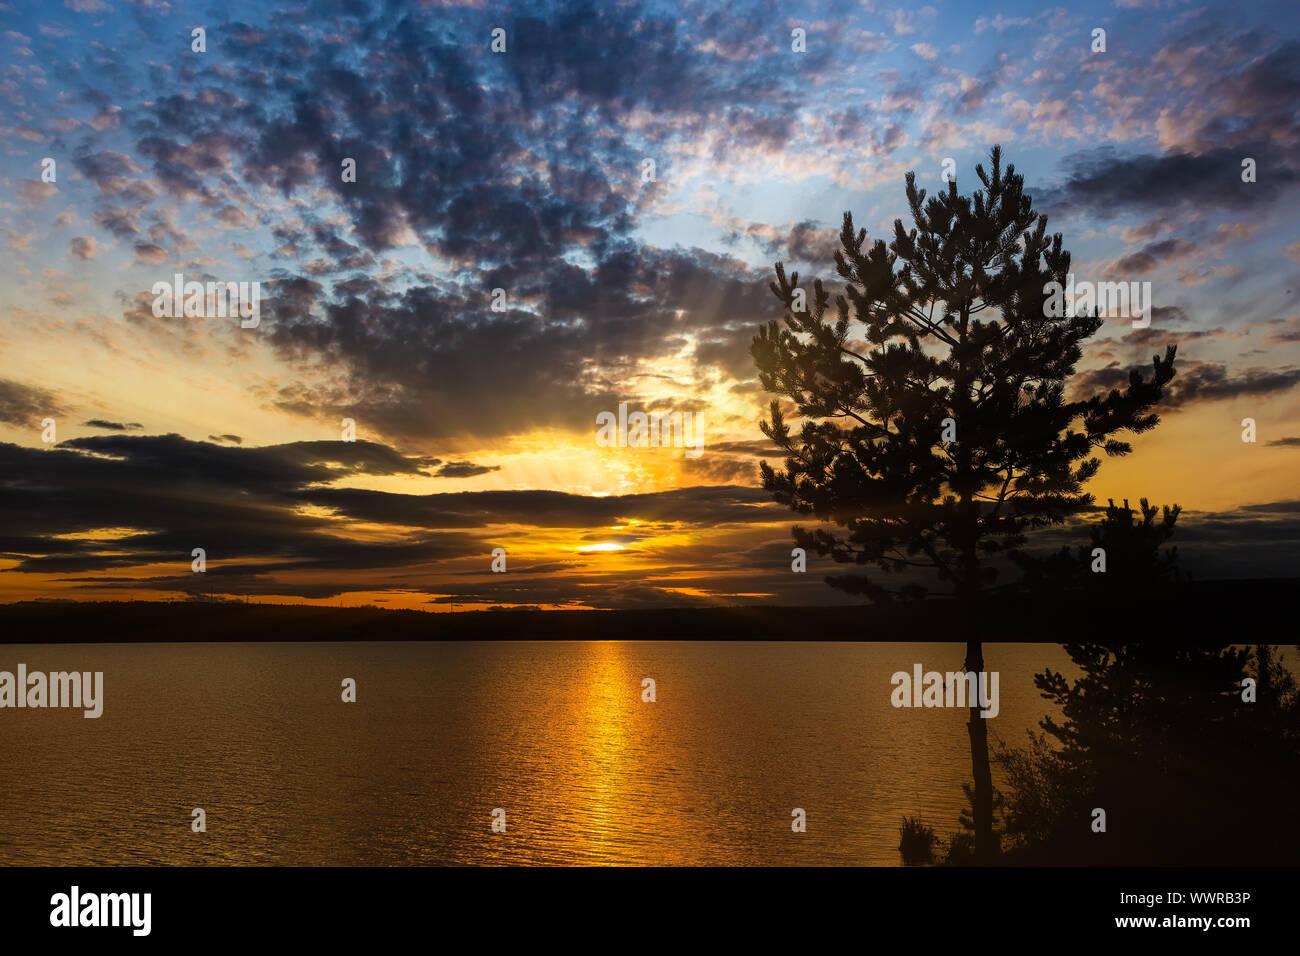 Colorful sunset on the lake with pine silhouette in the foreground Stock Photo